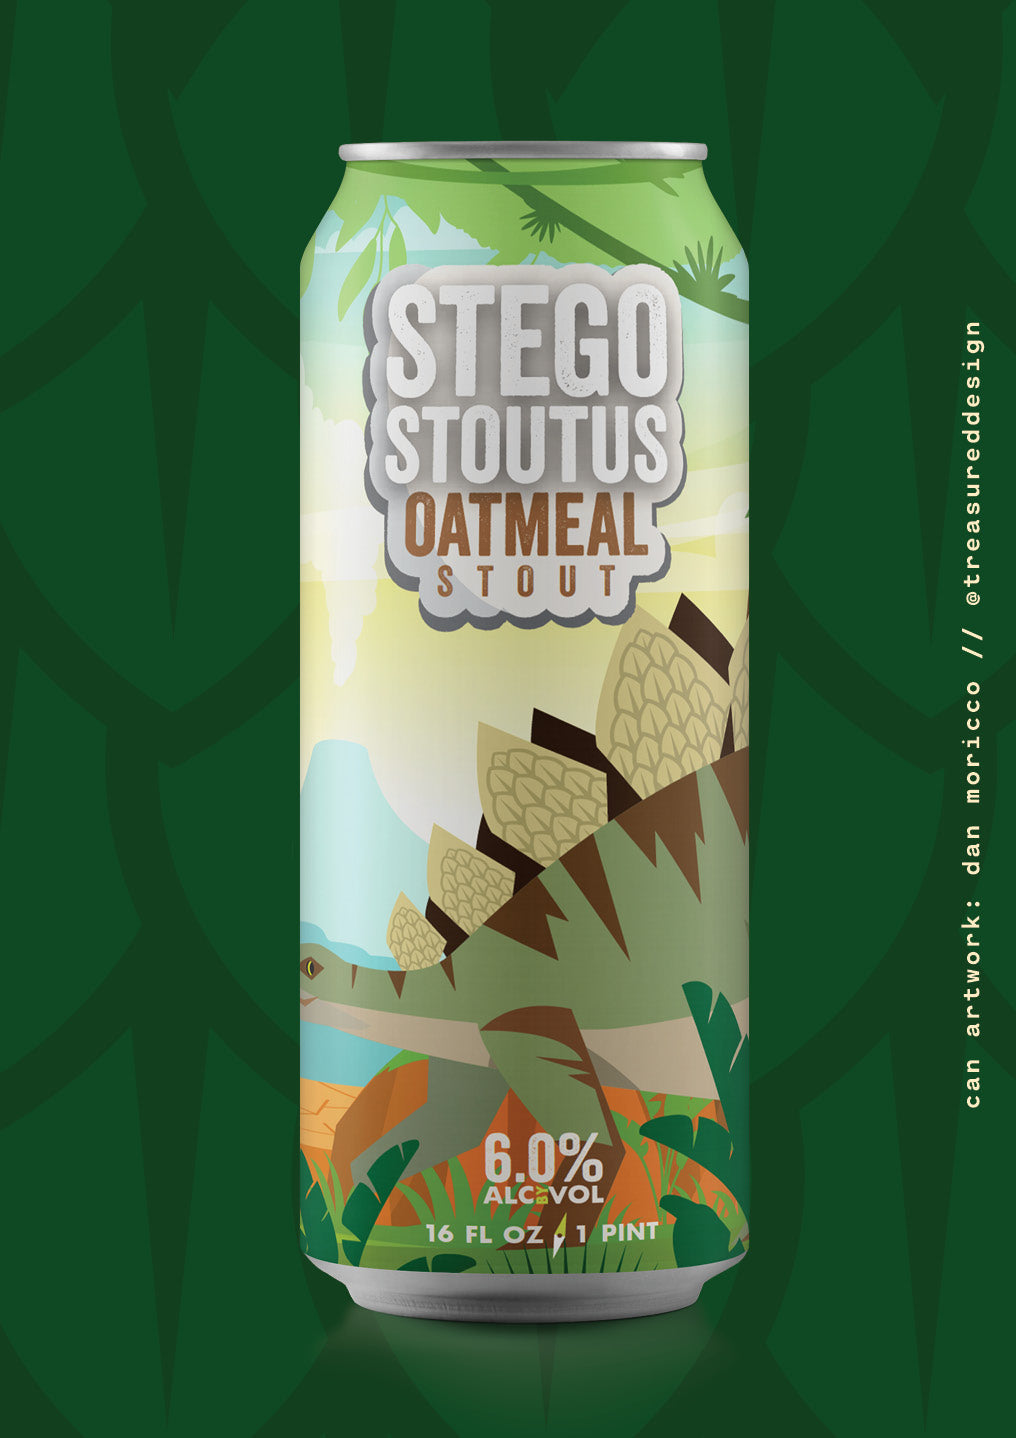 Stego-Stoutus by North 5th Brewing Co. from North Las Vegas